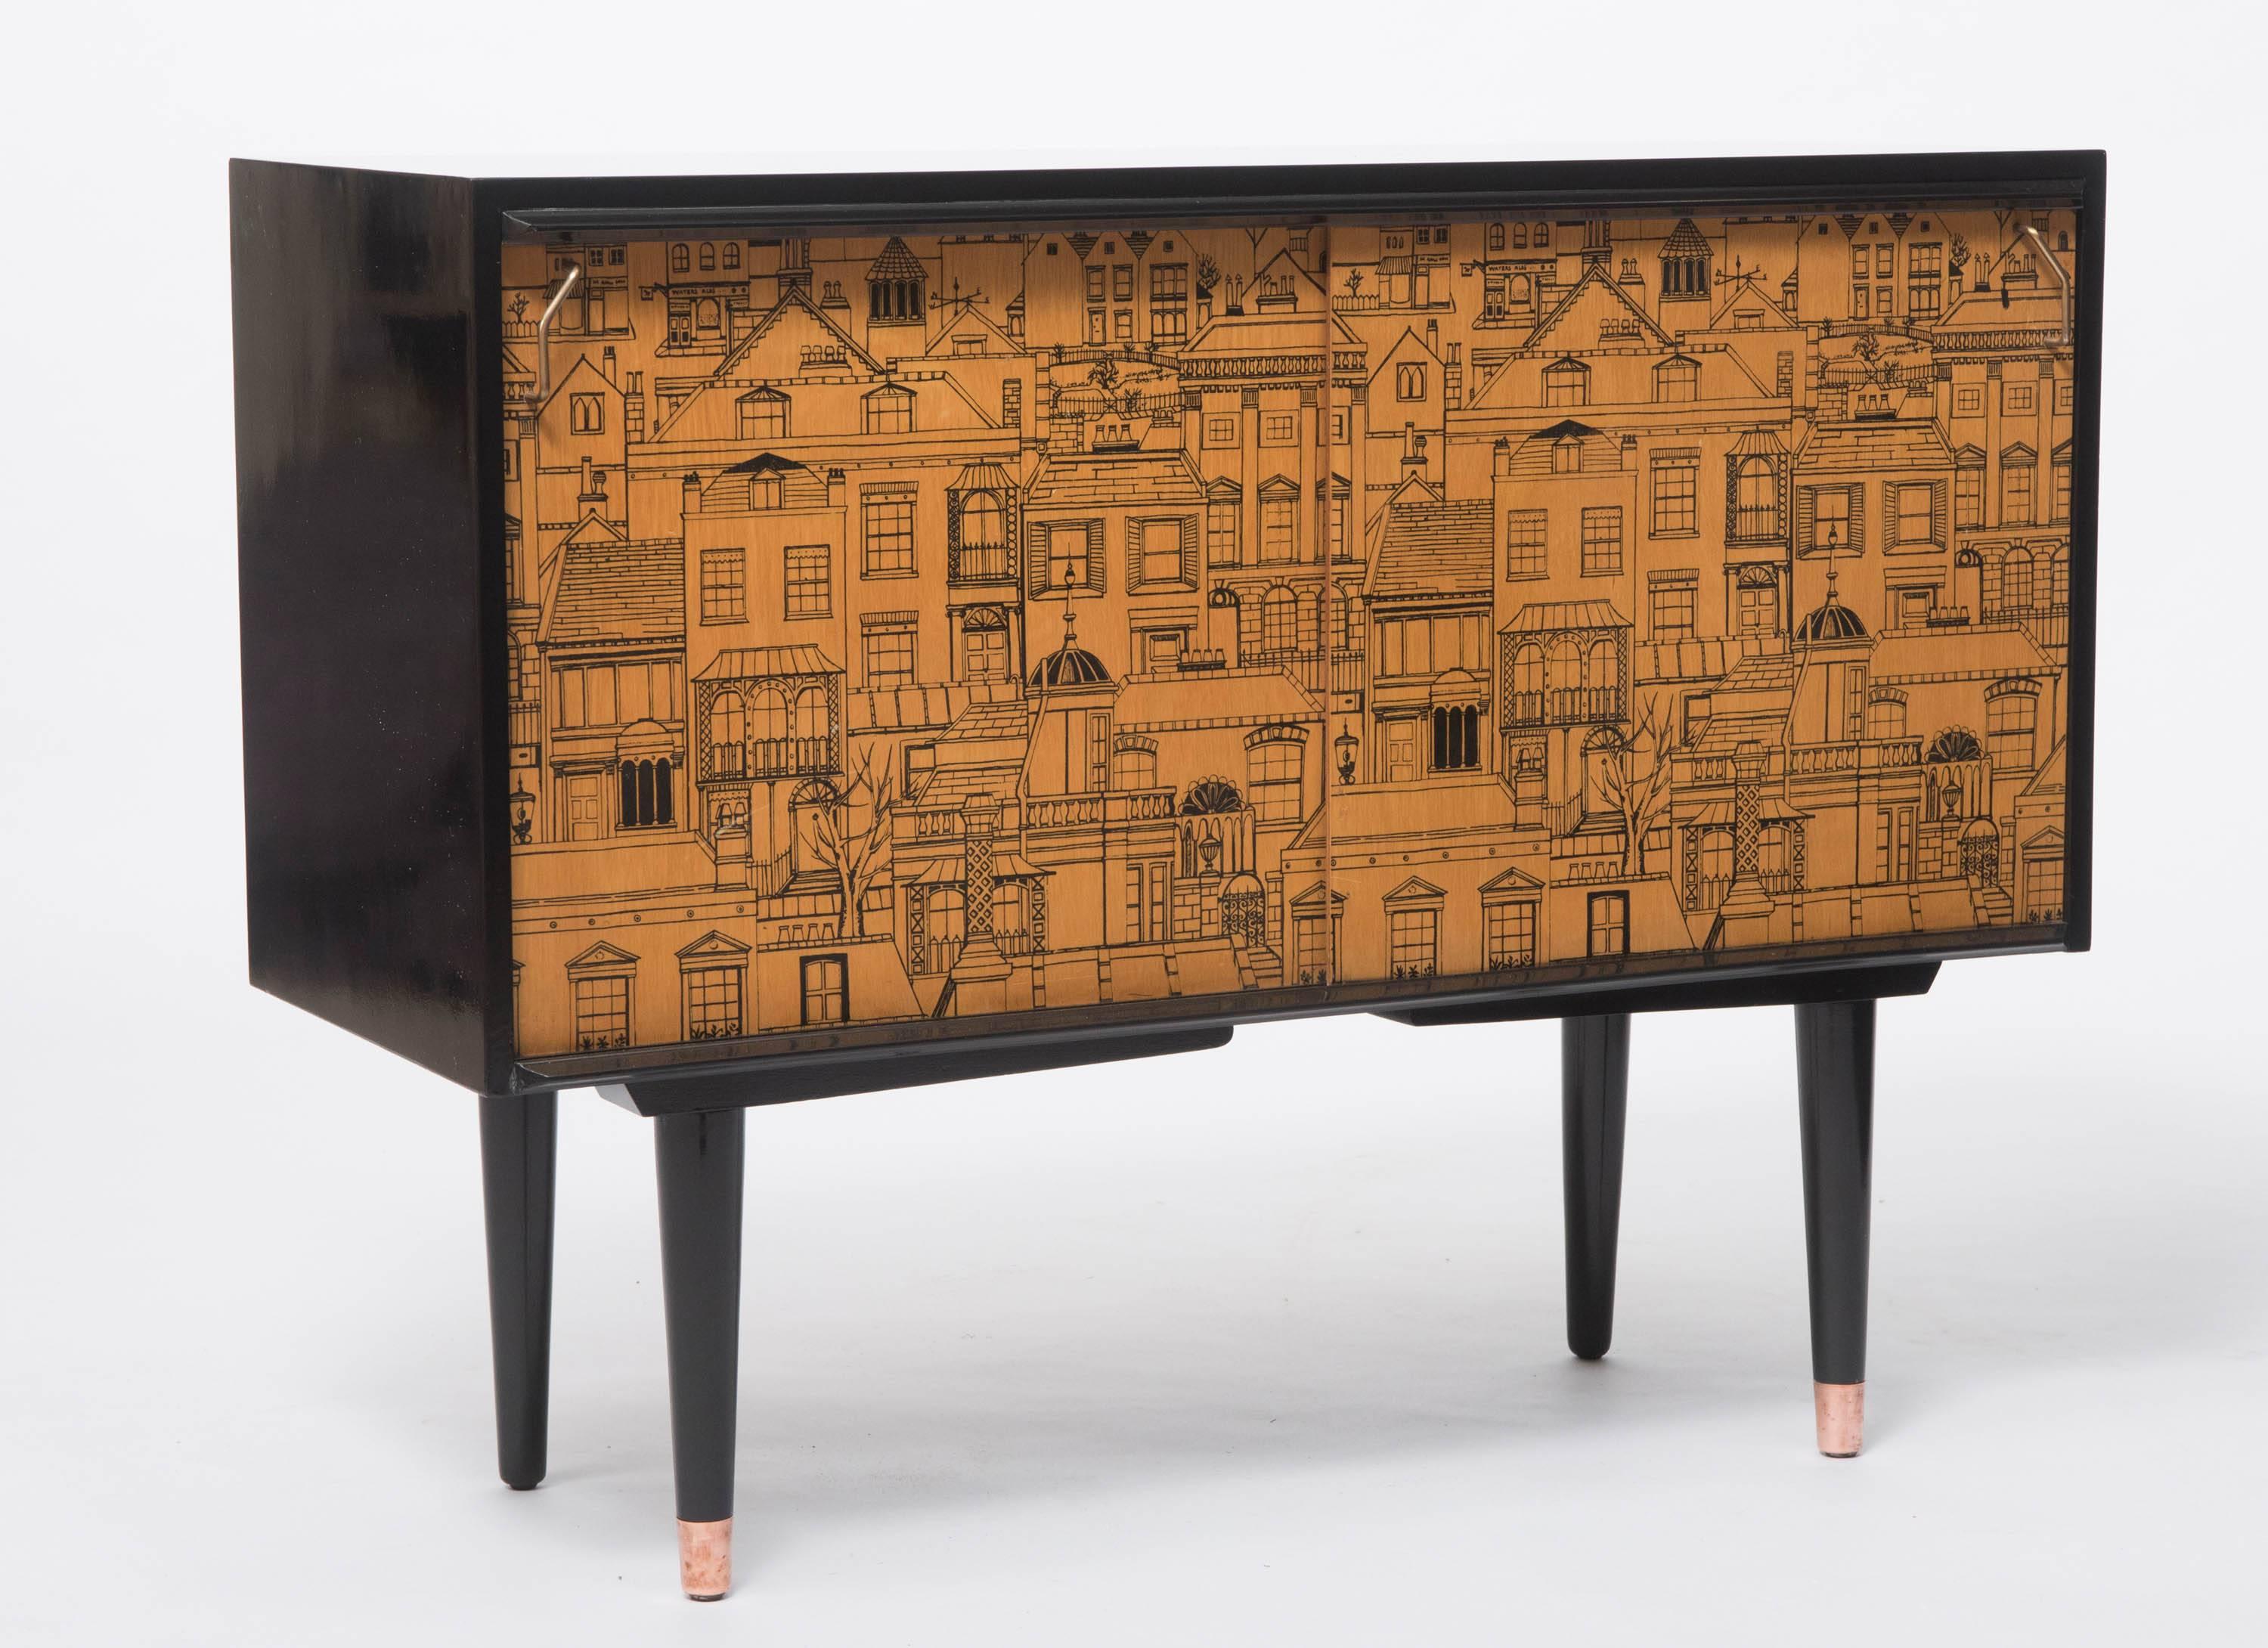 A rare cabinet by G.W. Evans and designed by Robert Heritage.
Model no. D.5542
The rectangular cabinet designed with sliding doors.
Printed with an architectural vignette designed by Dorothy Heritage.
Ebonized areas.
One side of the cabinet